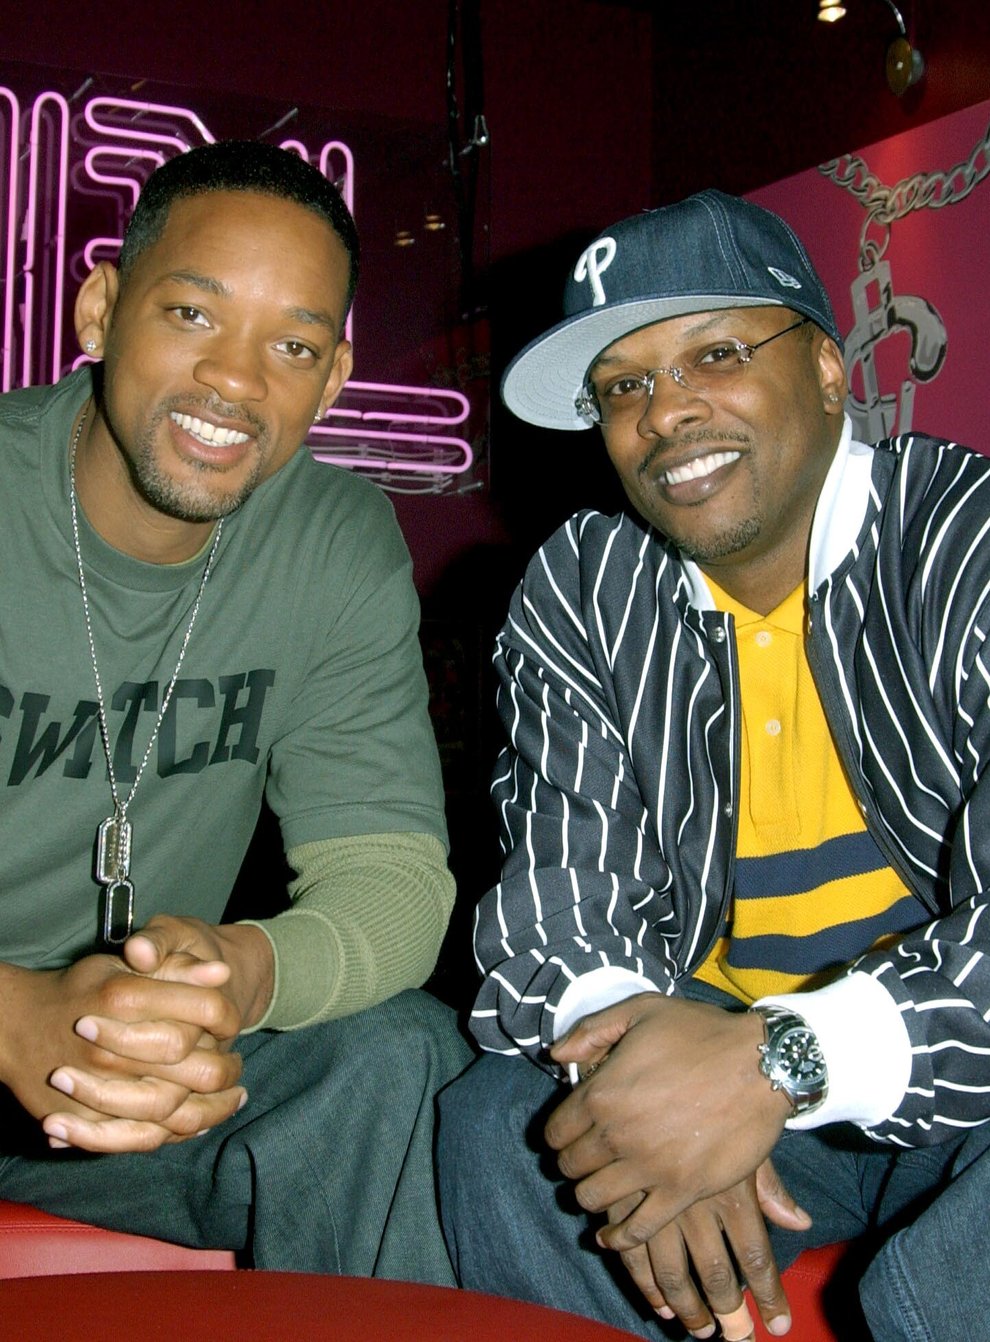 Smith and Jazzy Jeff starred in the hit 1990s show